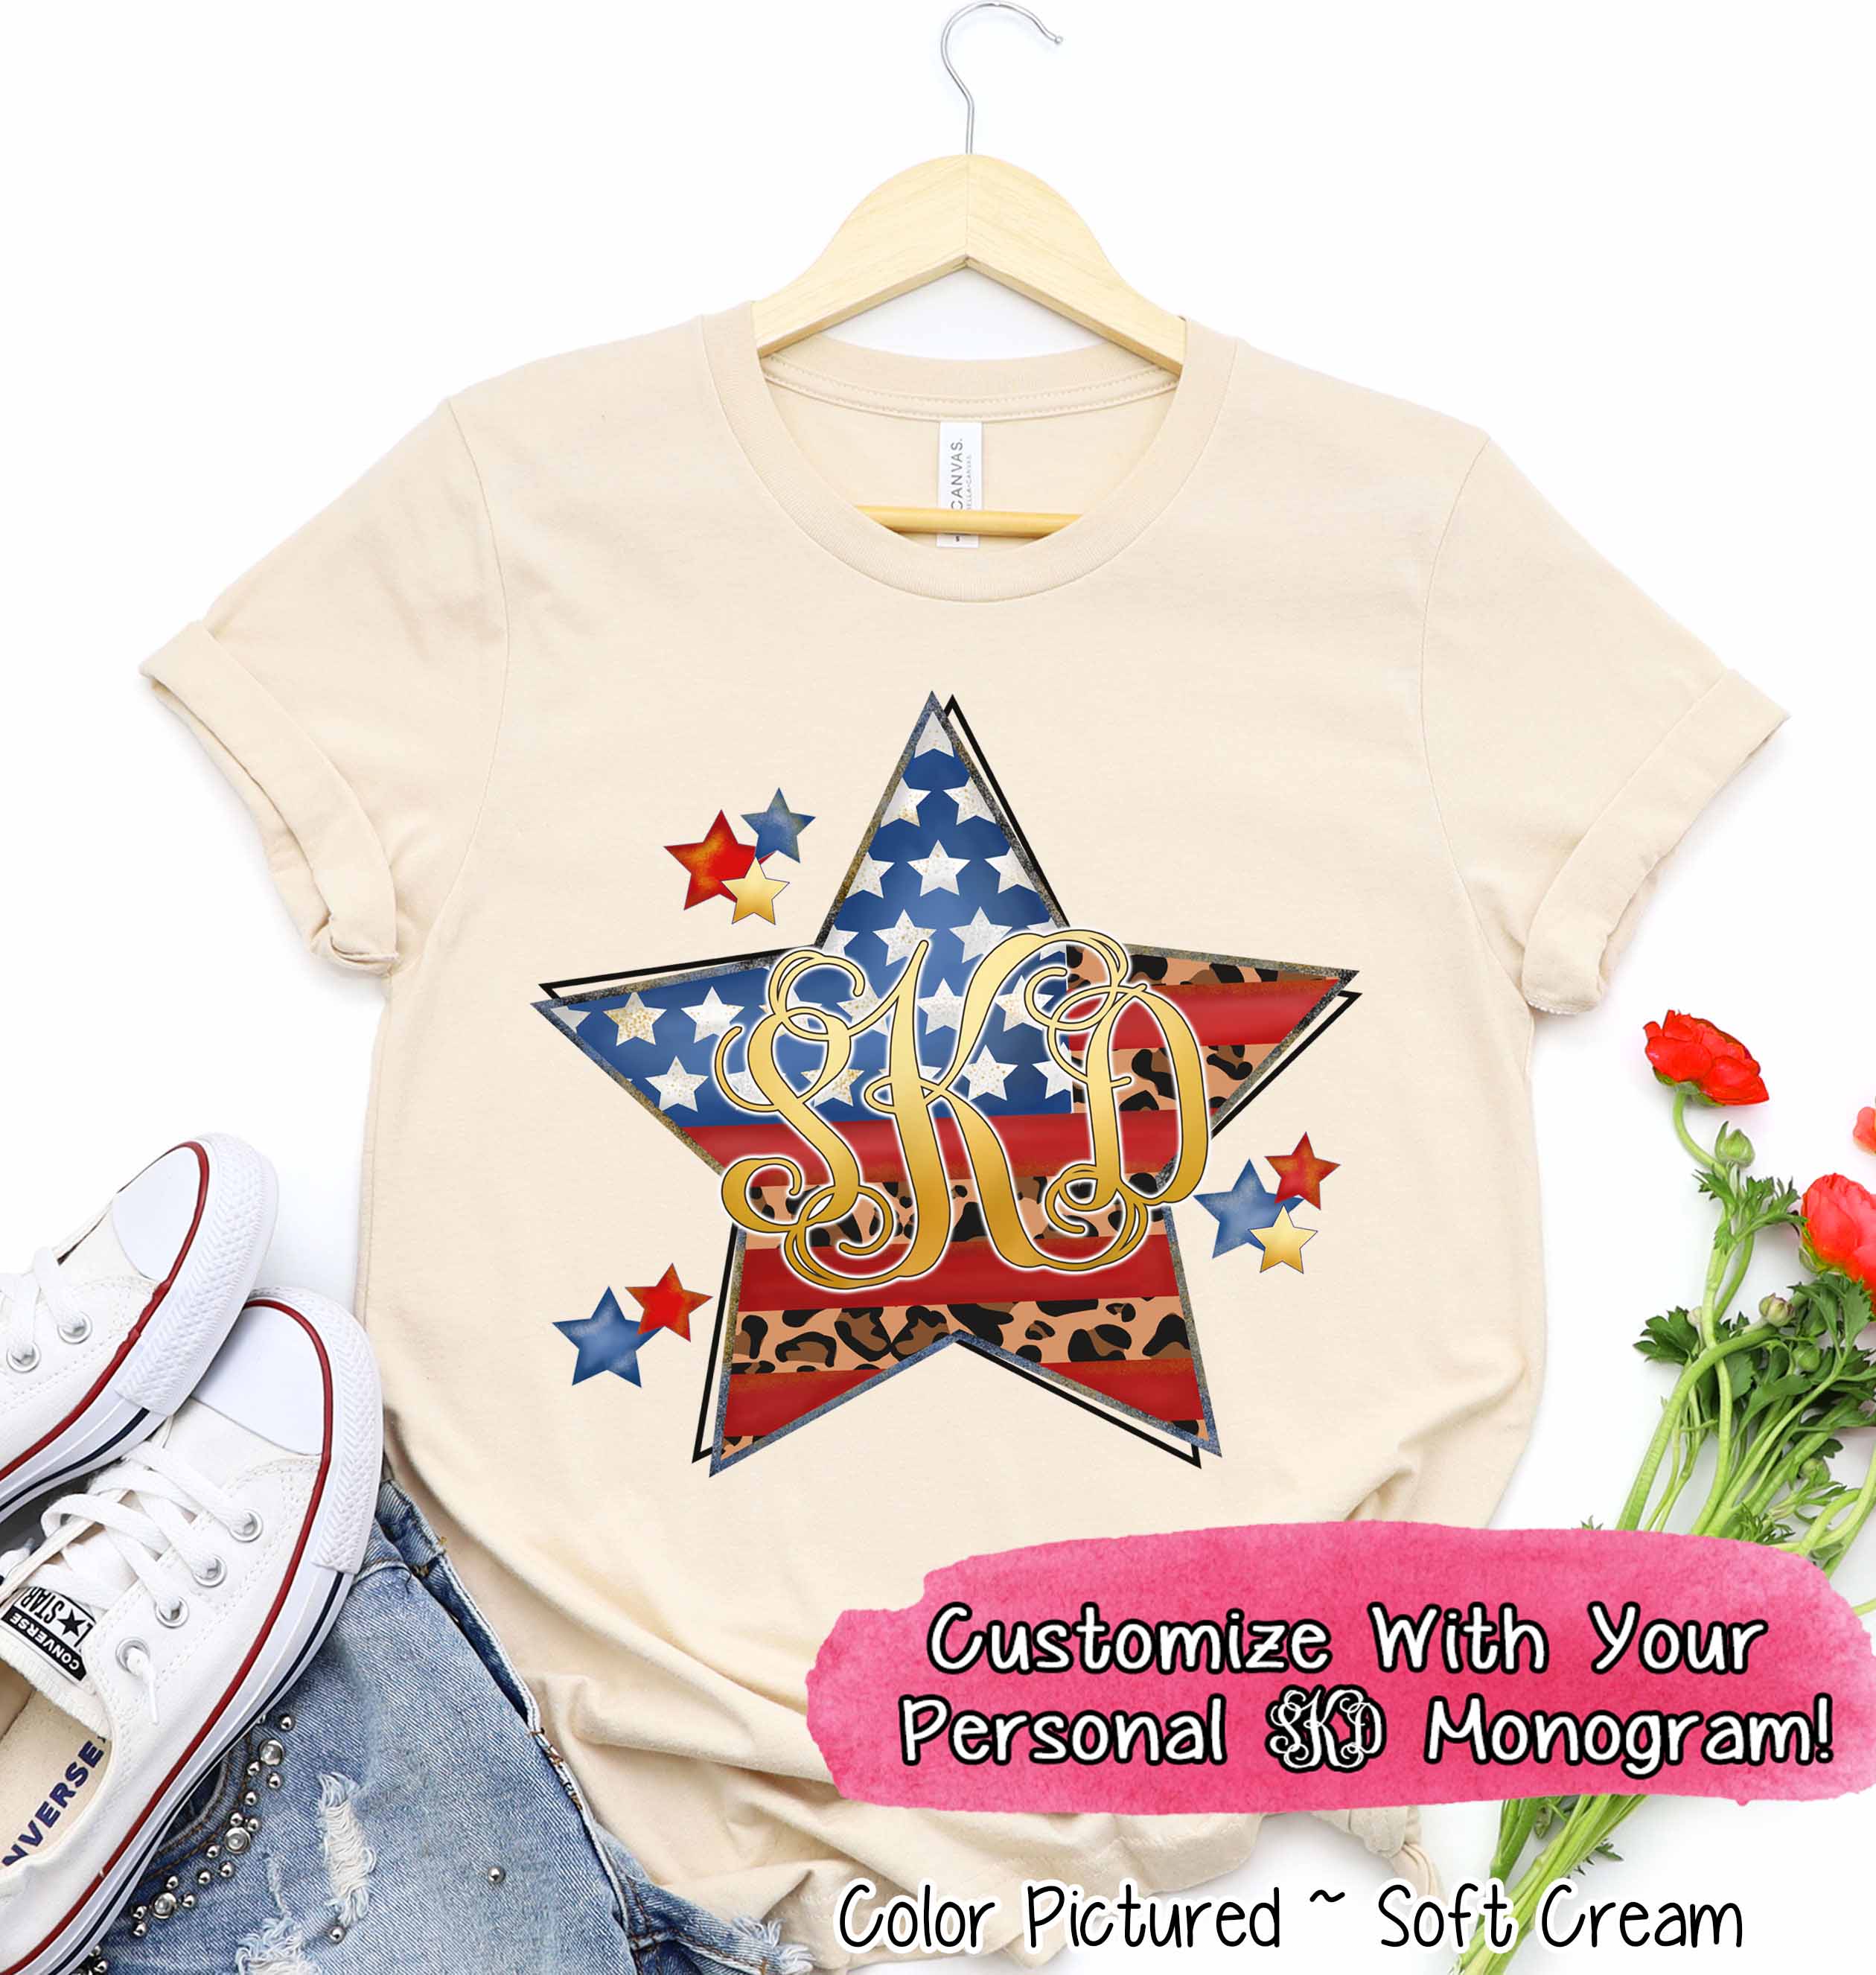 Patriotic Flag Star with Leopard Accents and Monogram Tee